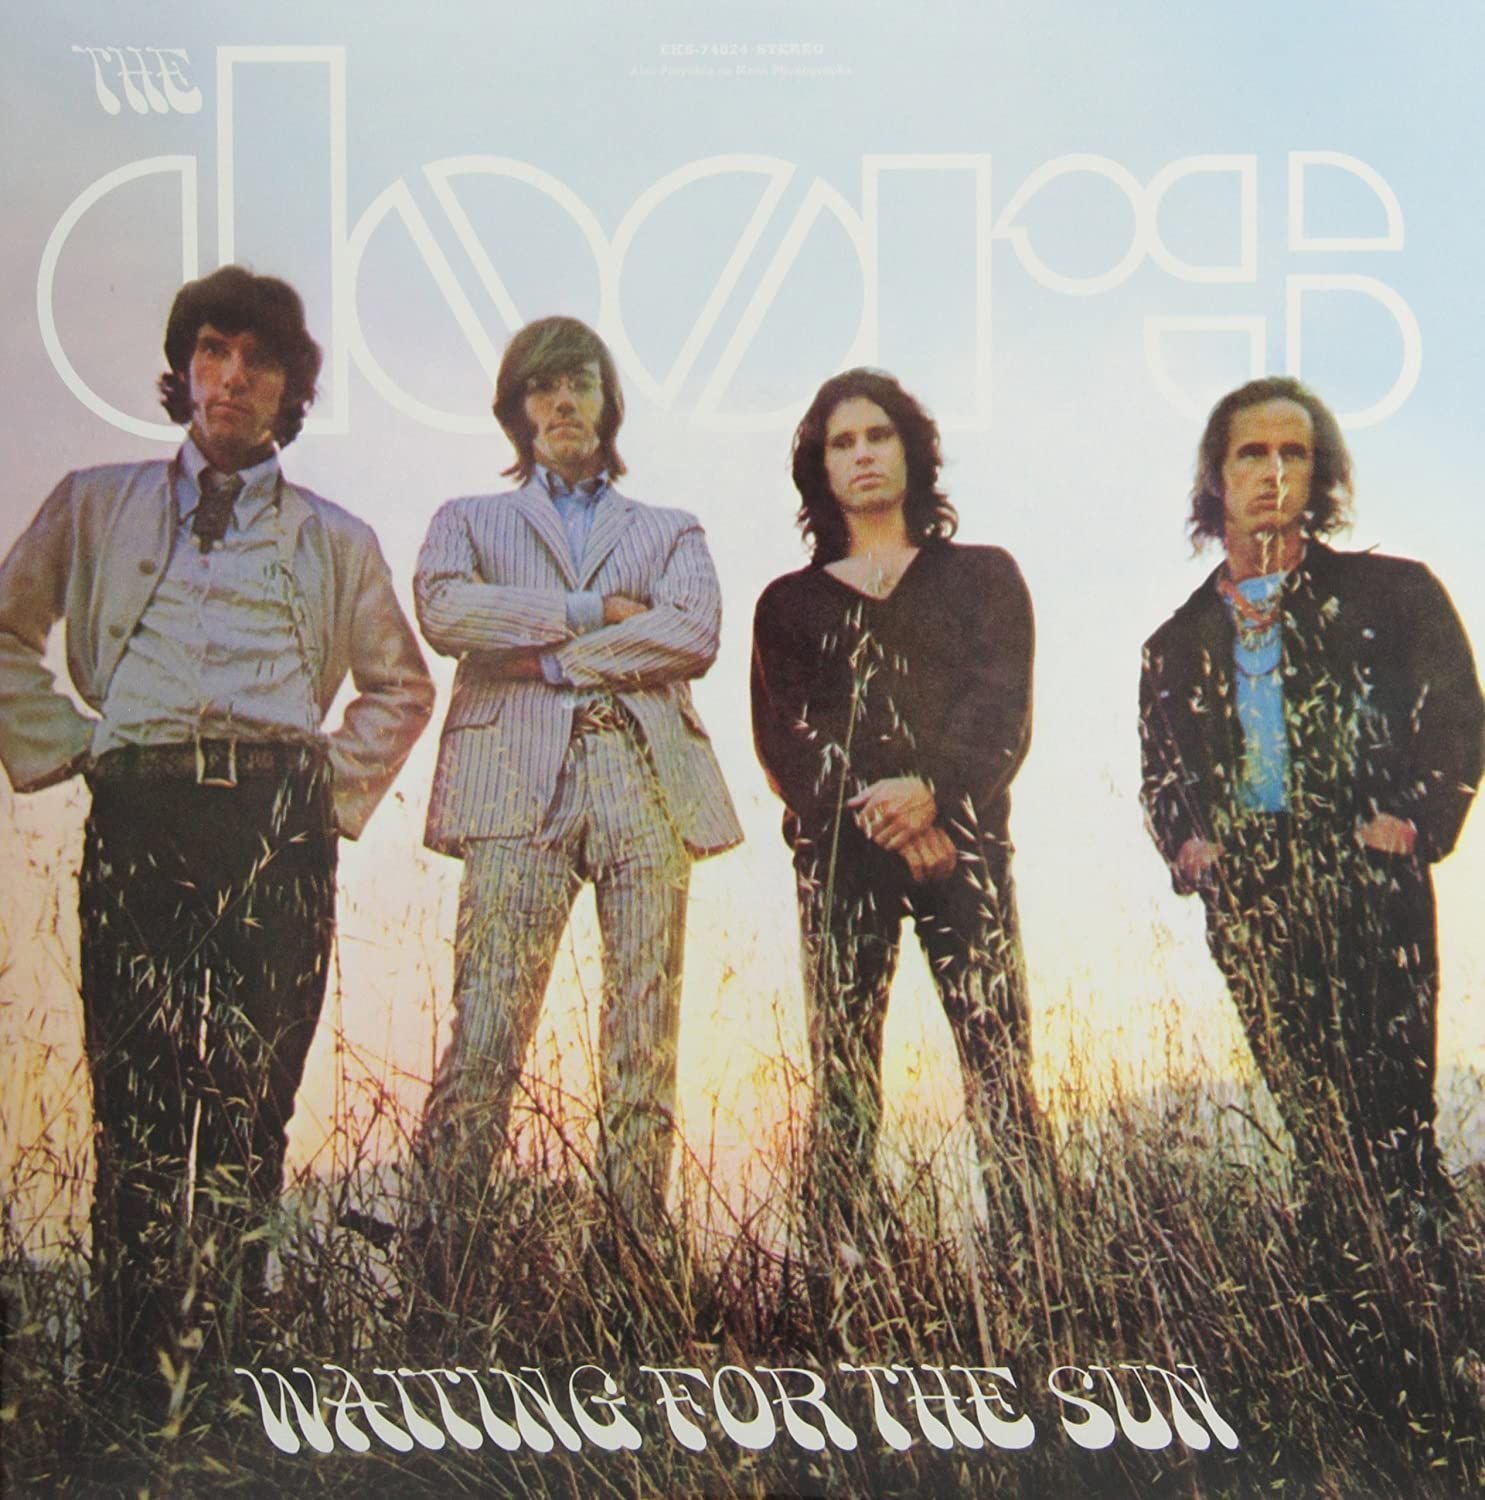 Vinyl Record The Doors - Waiting For The Sun (LP)